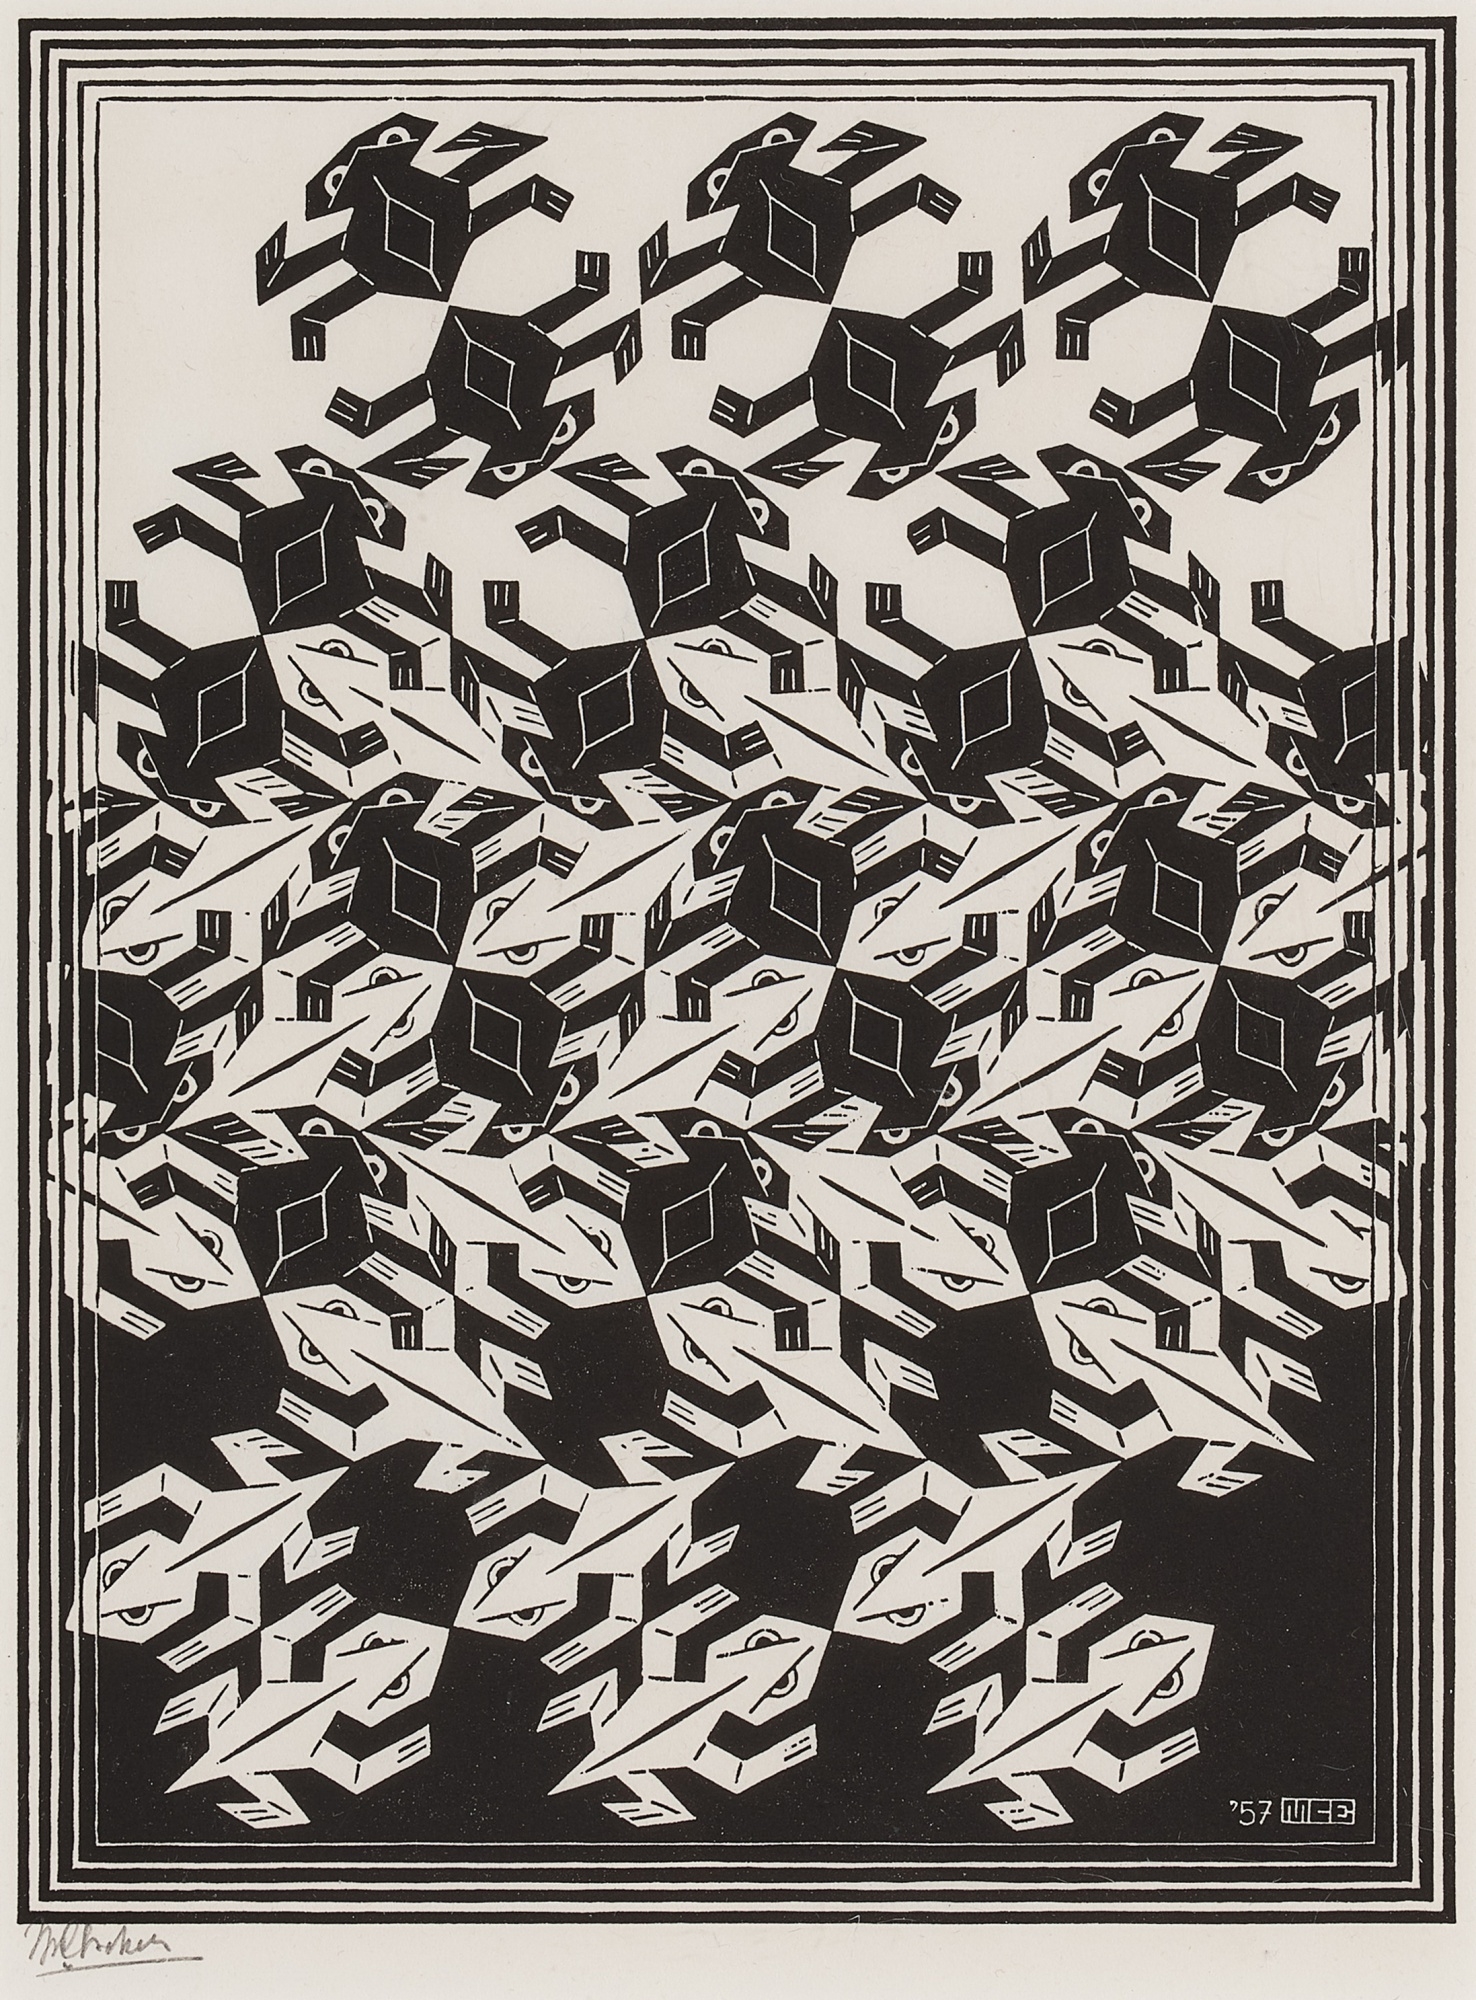 Regular Division of the Plane V (B. 420) by Maurits Cornelis Escher, Executed in 1957